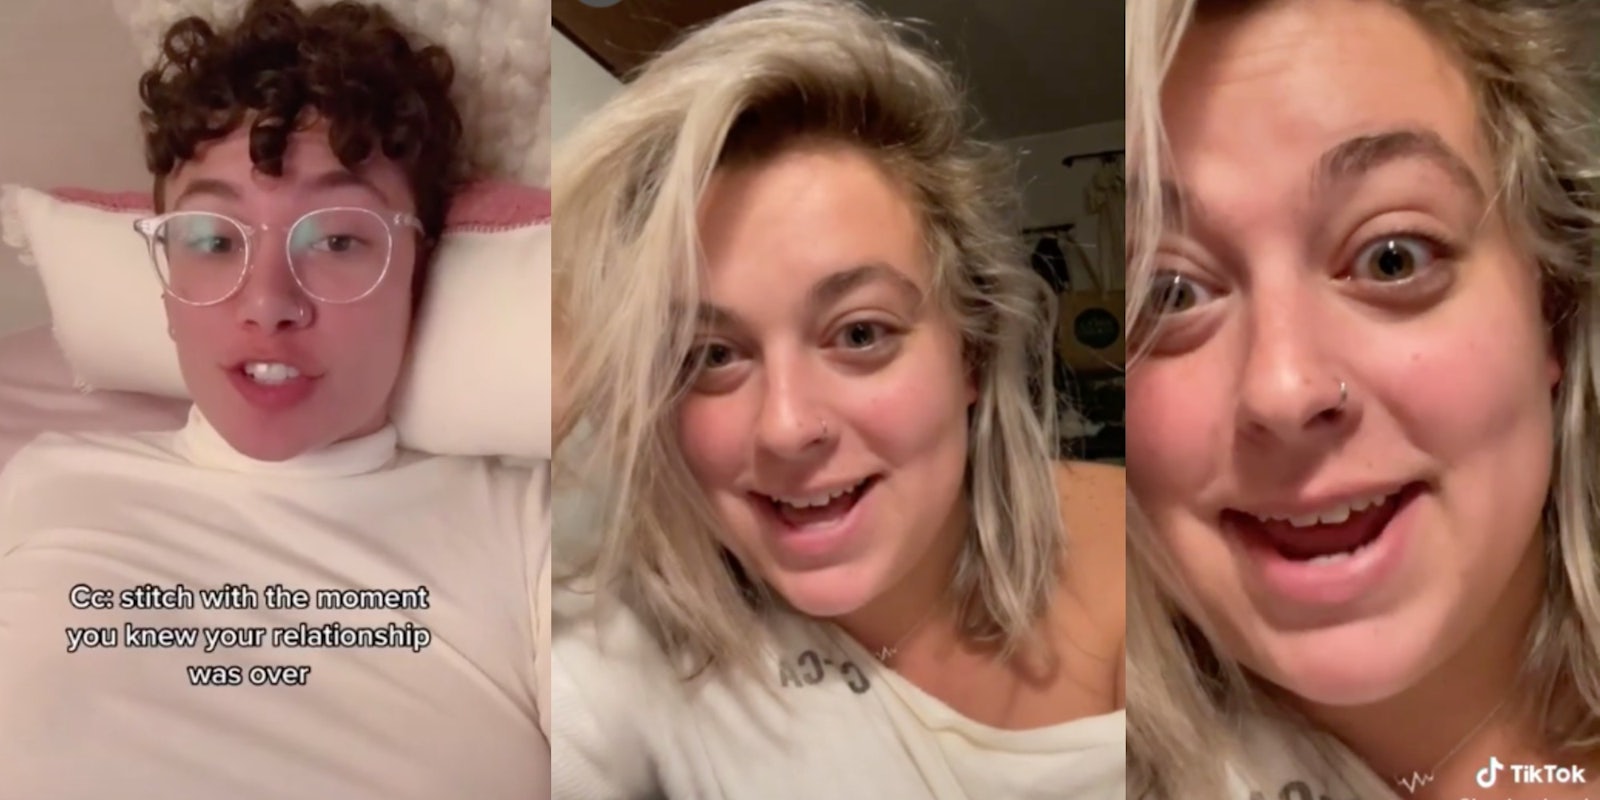 tiktok user brooke_abroad talking about how her boyfriend pretended she was dead so that he could cheat on her